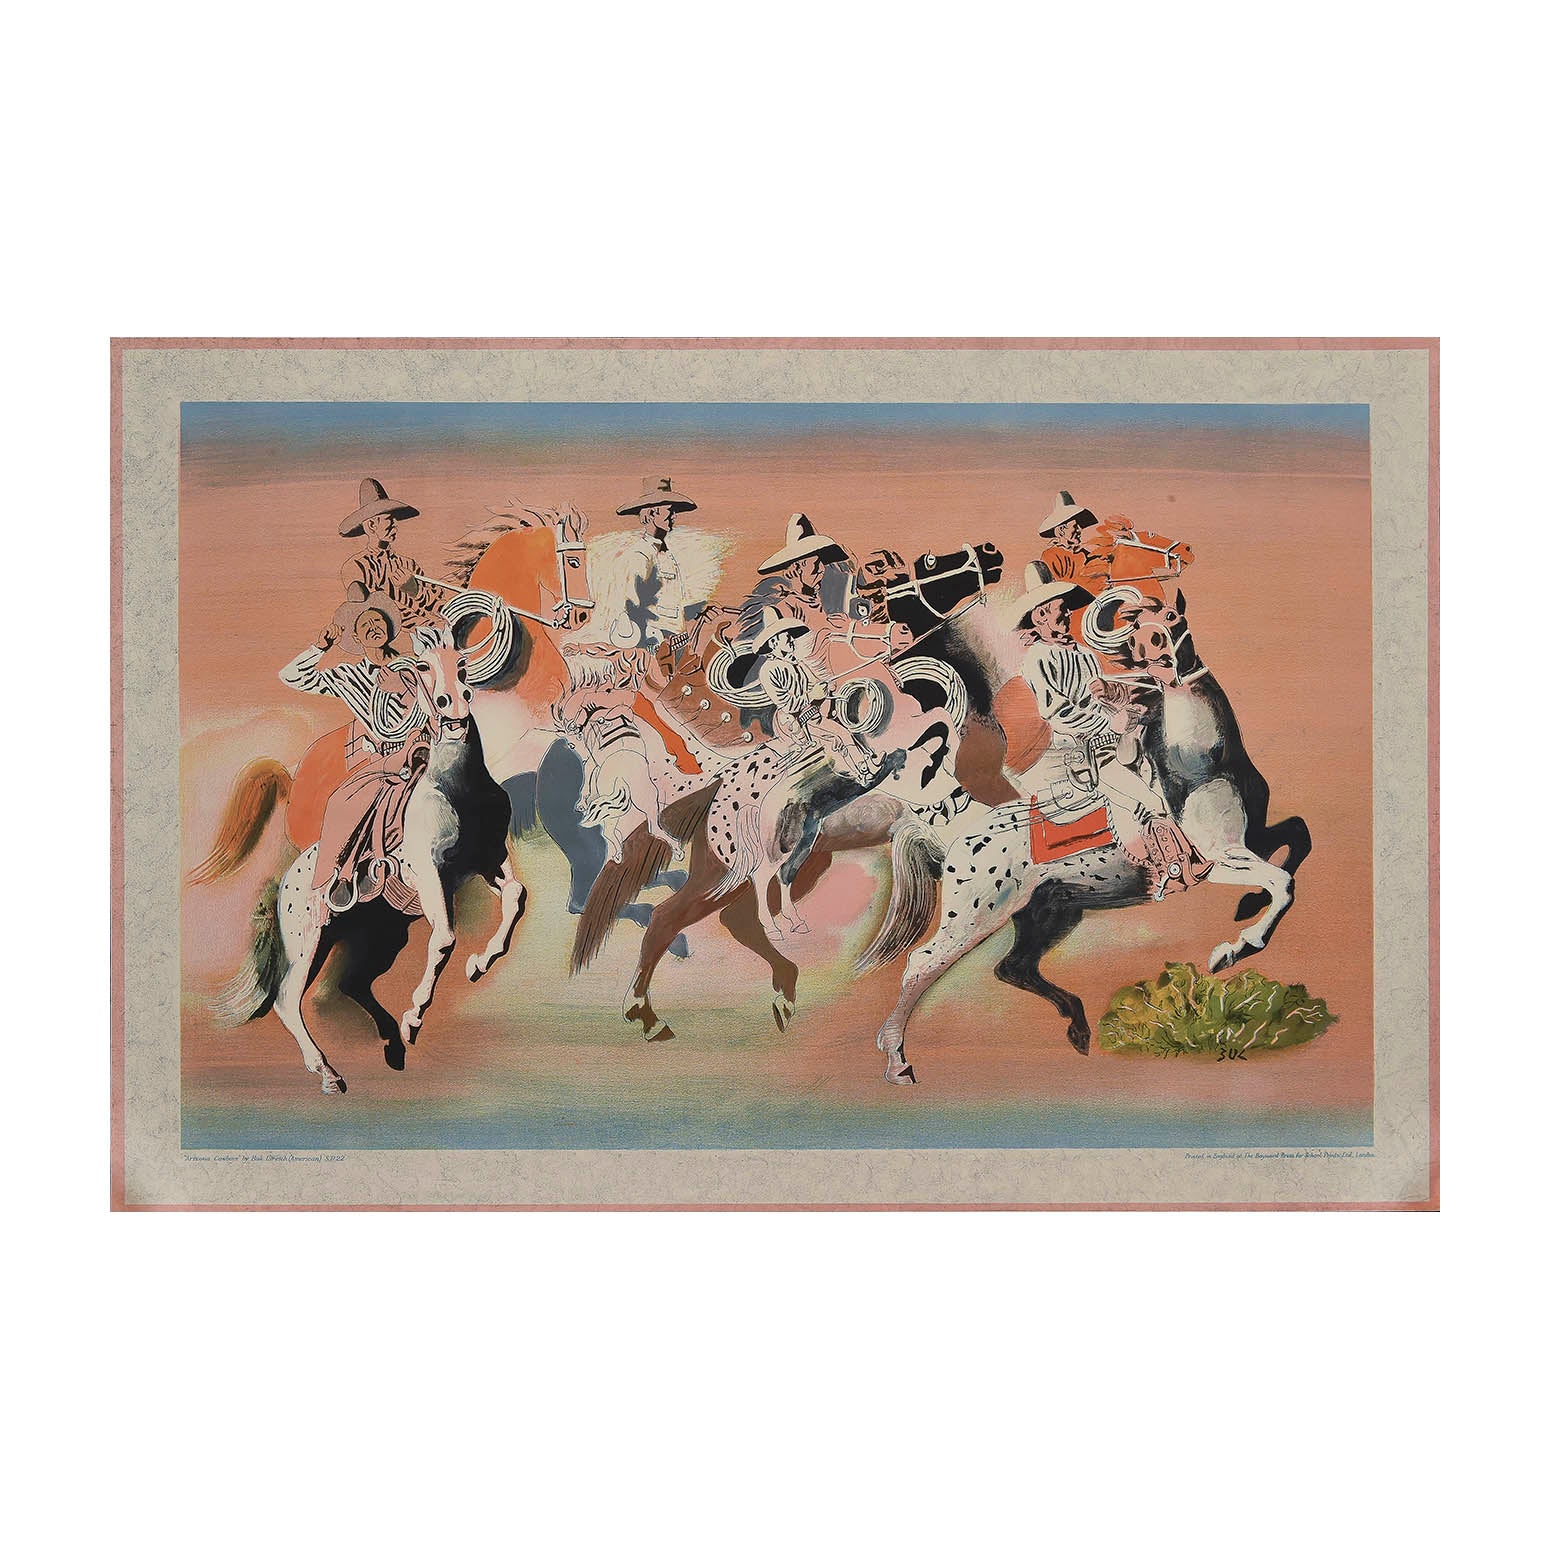 Original ‘School Print’, Arizona Cowboys, by Buk Ulreich, and published by School Prints Ltd, 1947. The image depicts eight cowboys on horses